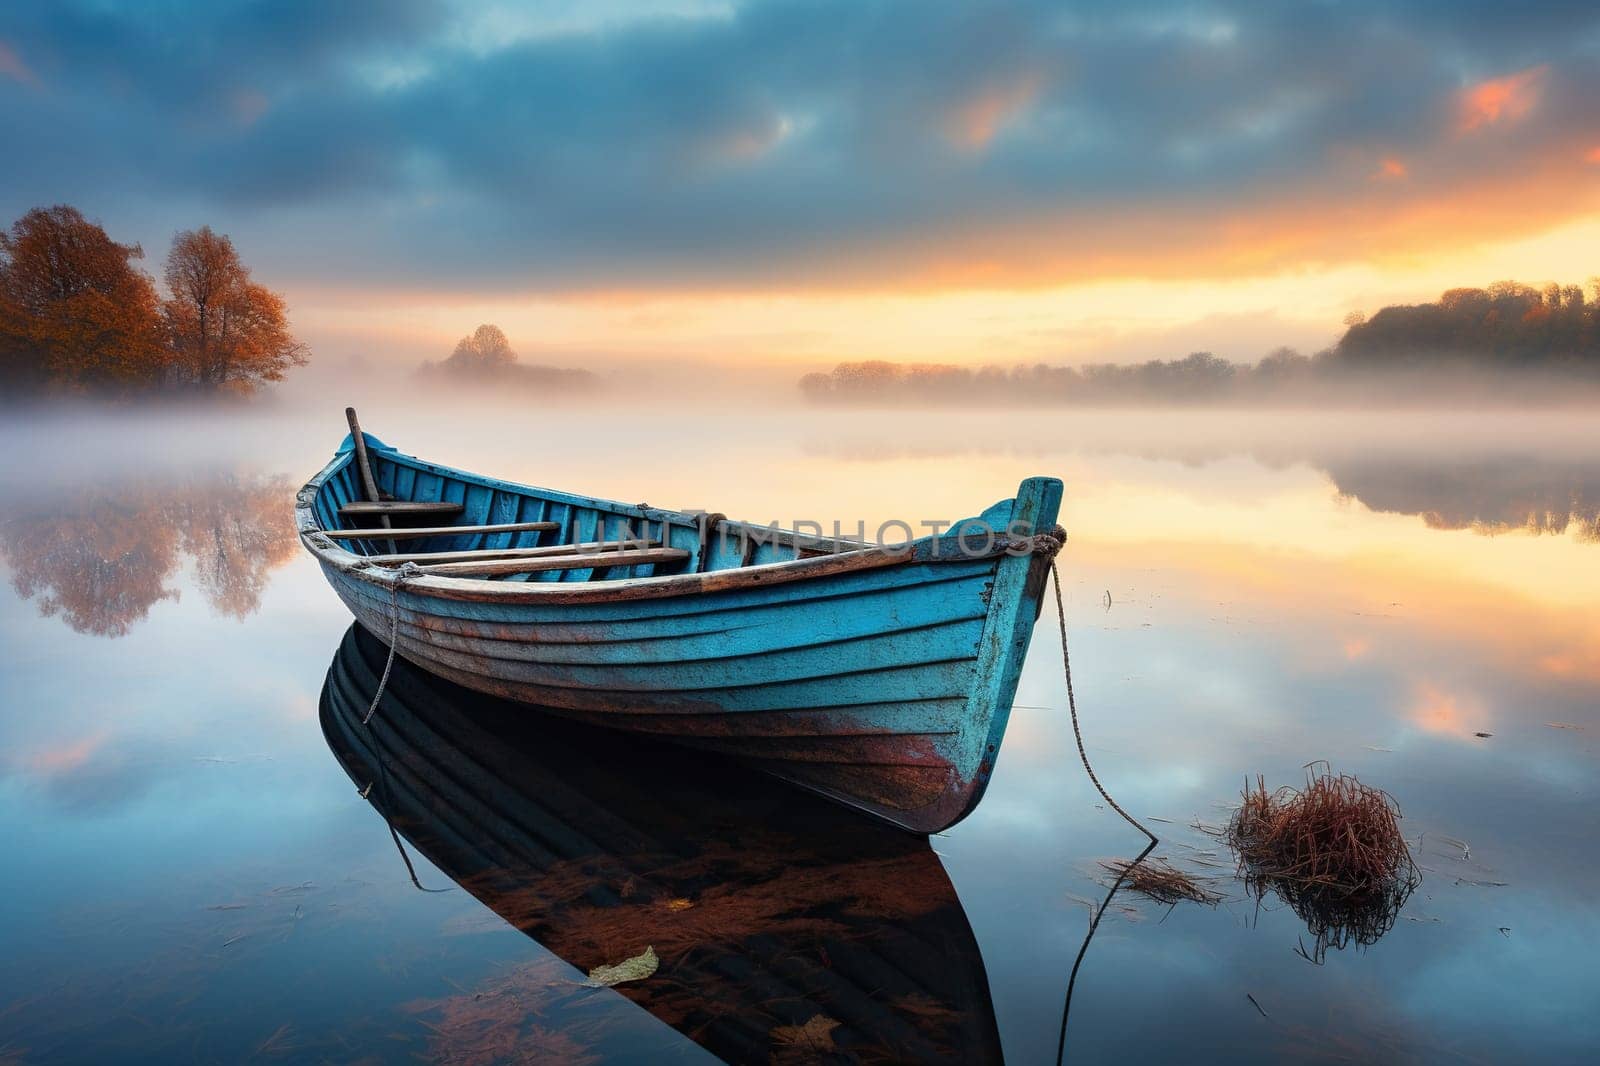 Old wooden boat in a foggy river in autumn.